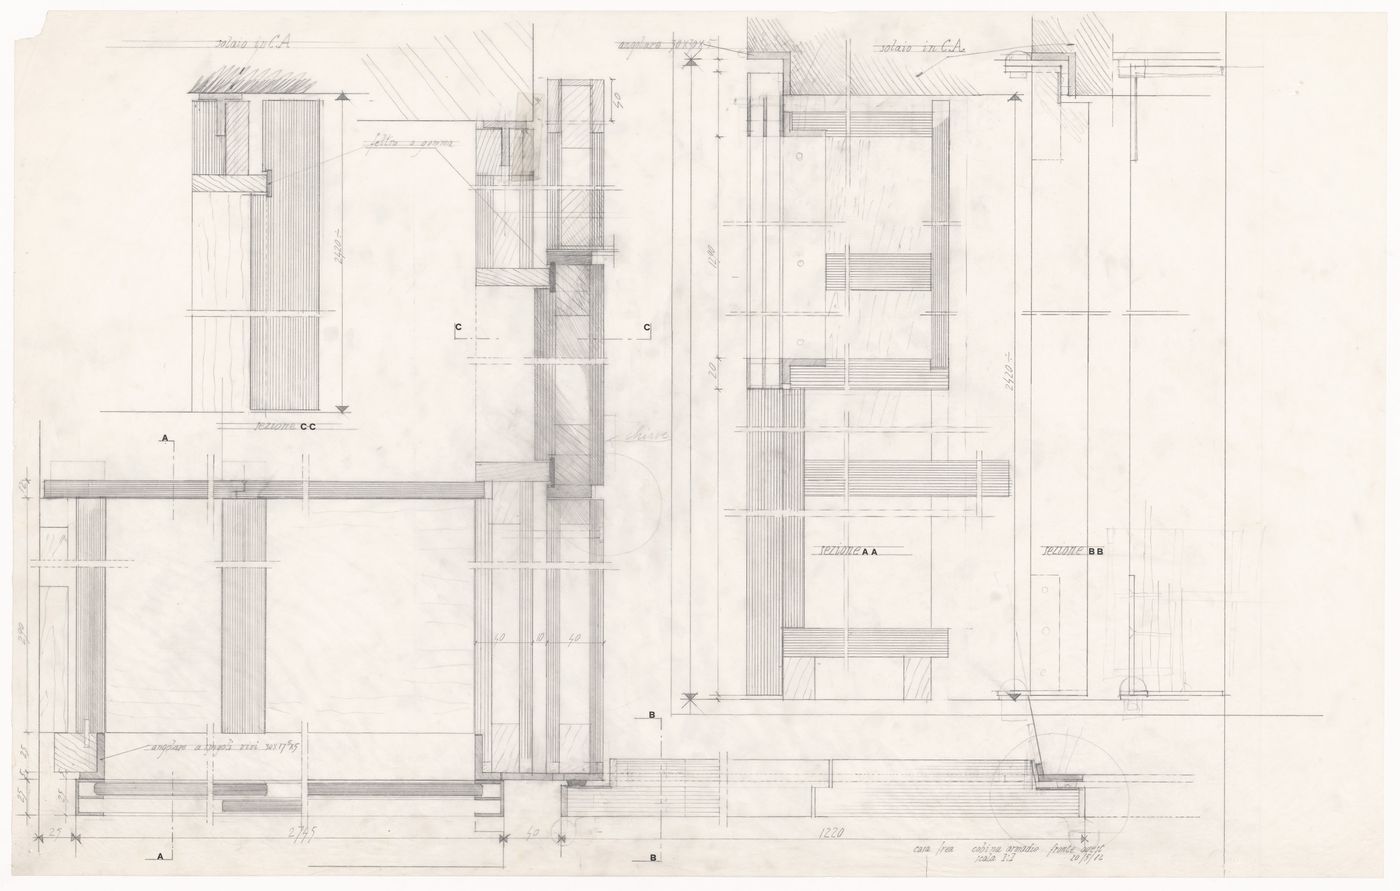 Plans and sections for Casa Frea, Milan, Italy